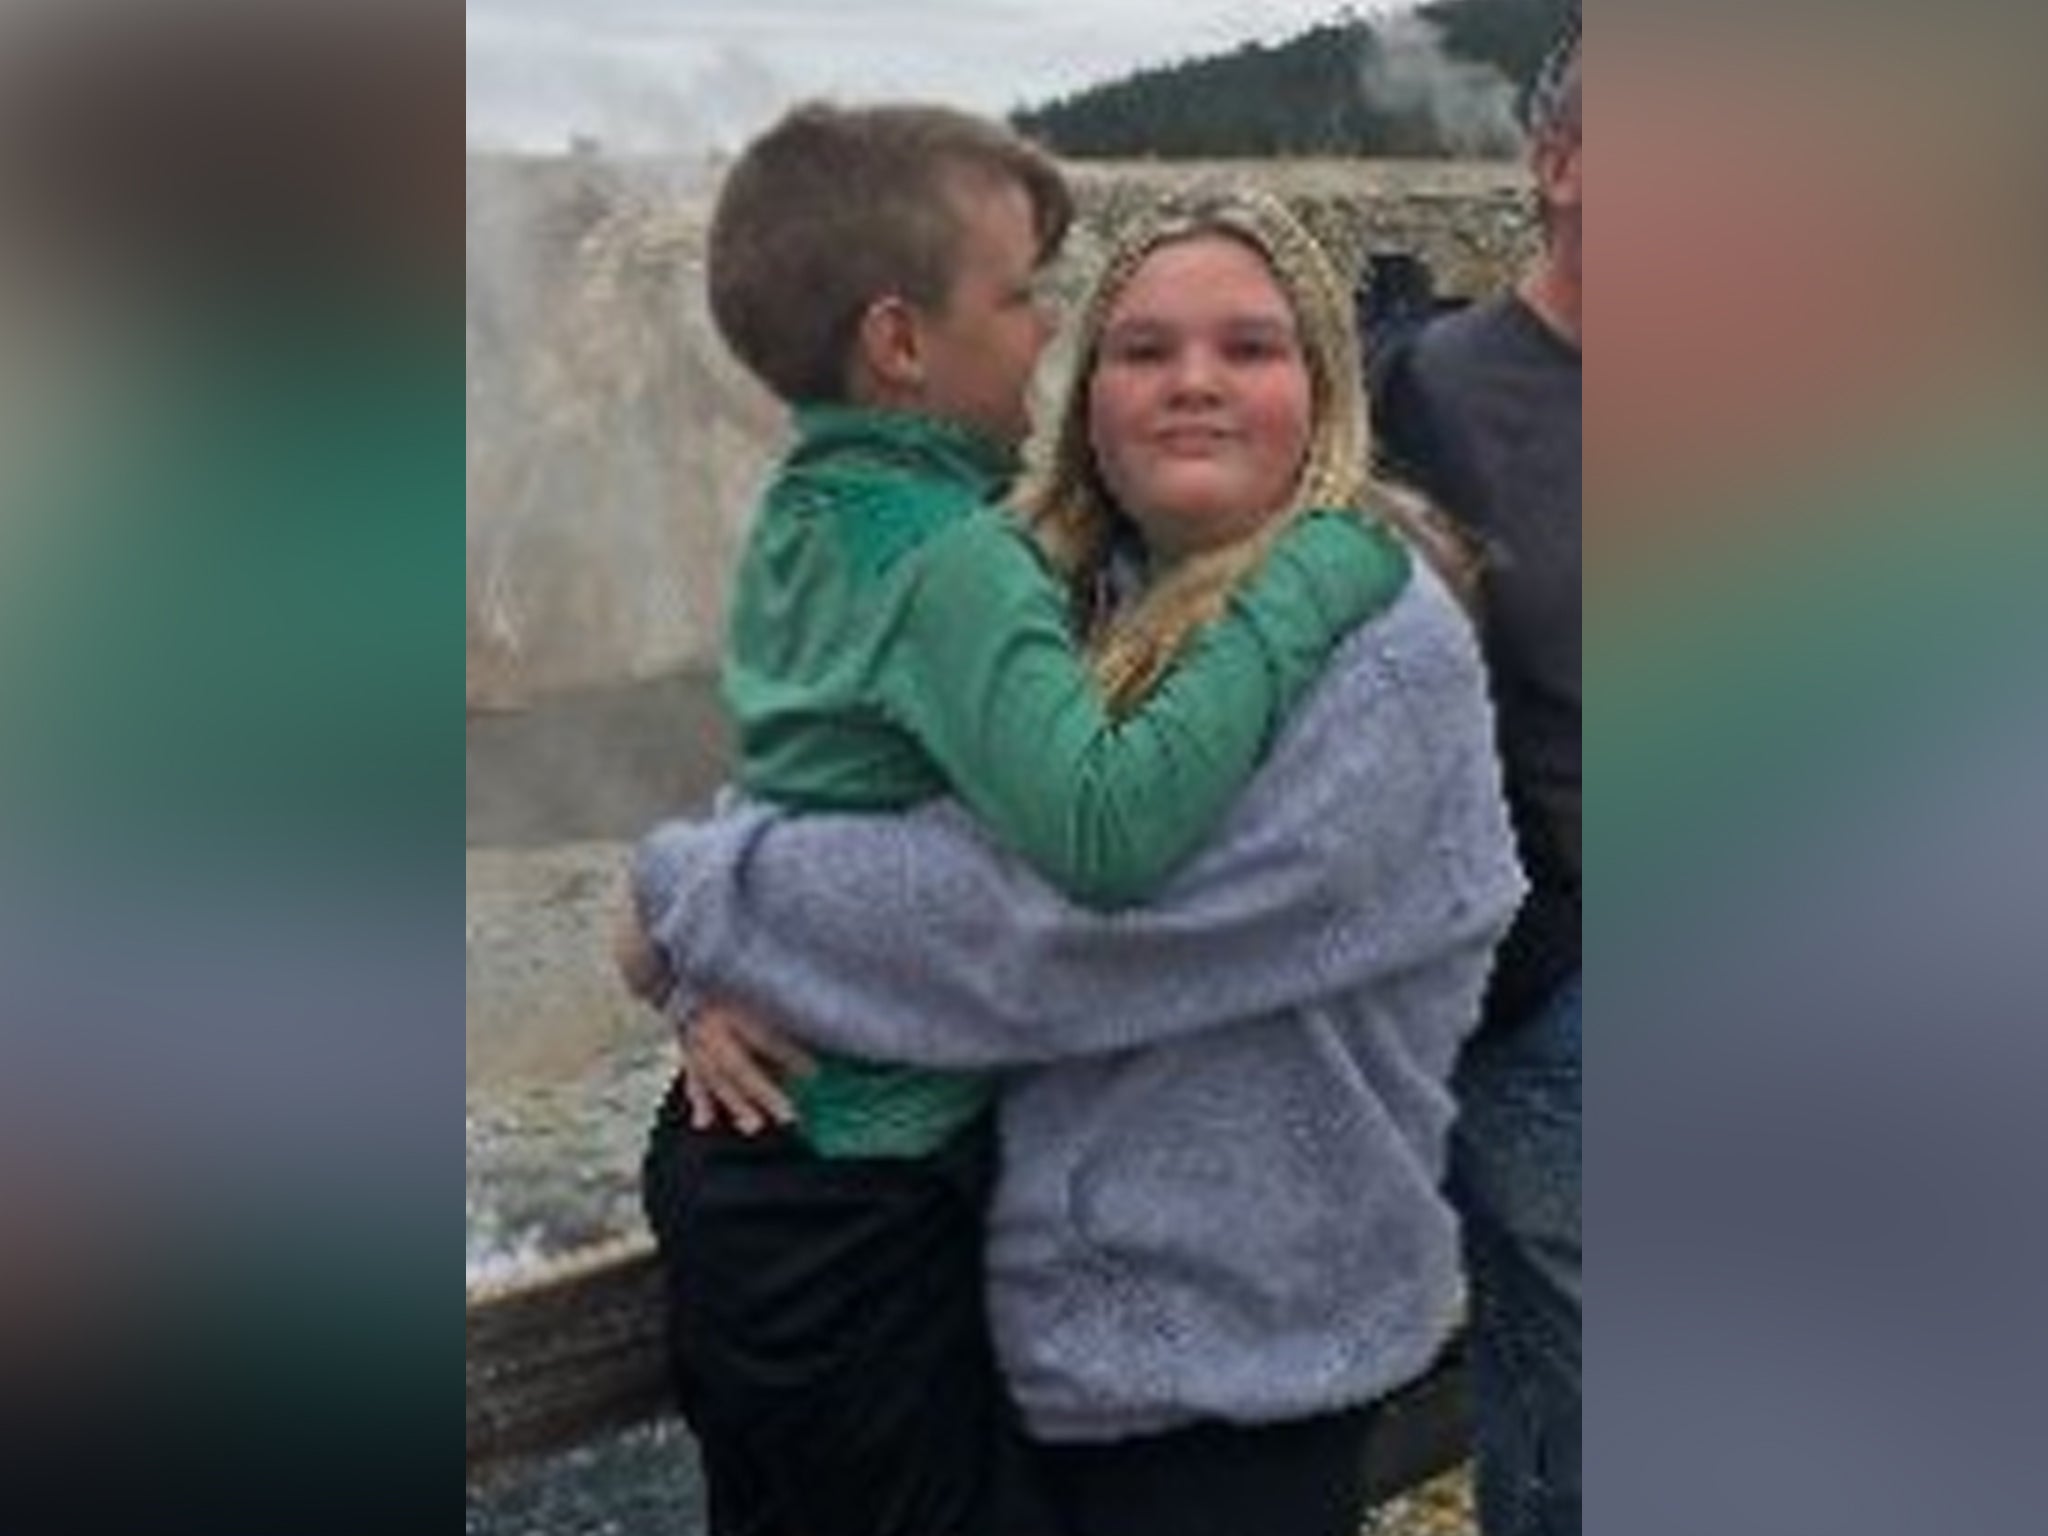 Tylee Ryan, 17, and her seven-year-old brother JJ Vallow